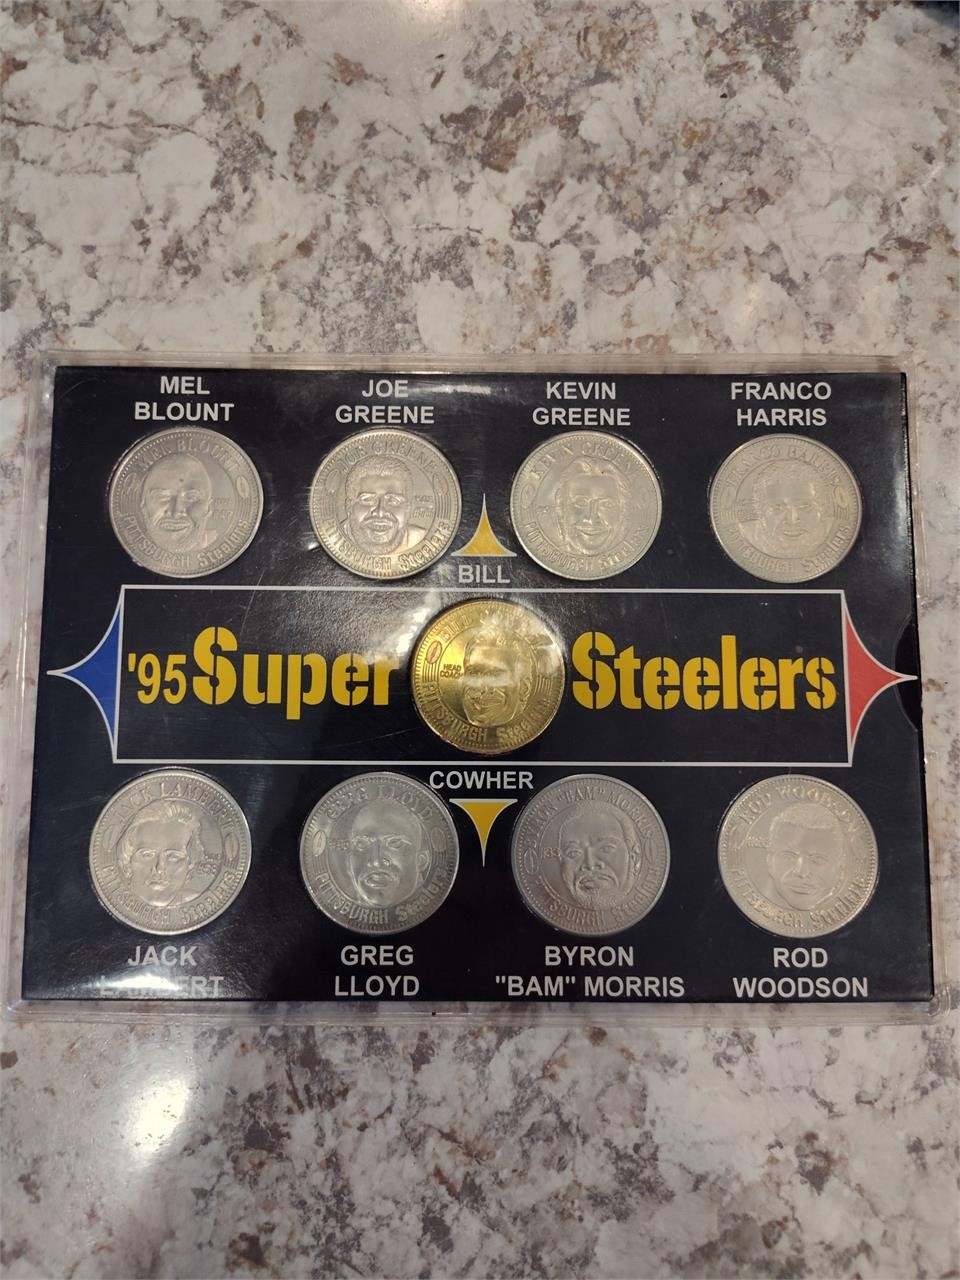 1995 Super Steelers Coin Set by Giant Eagle